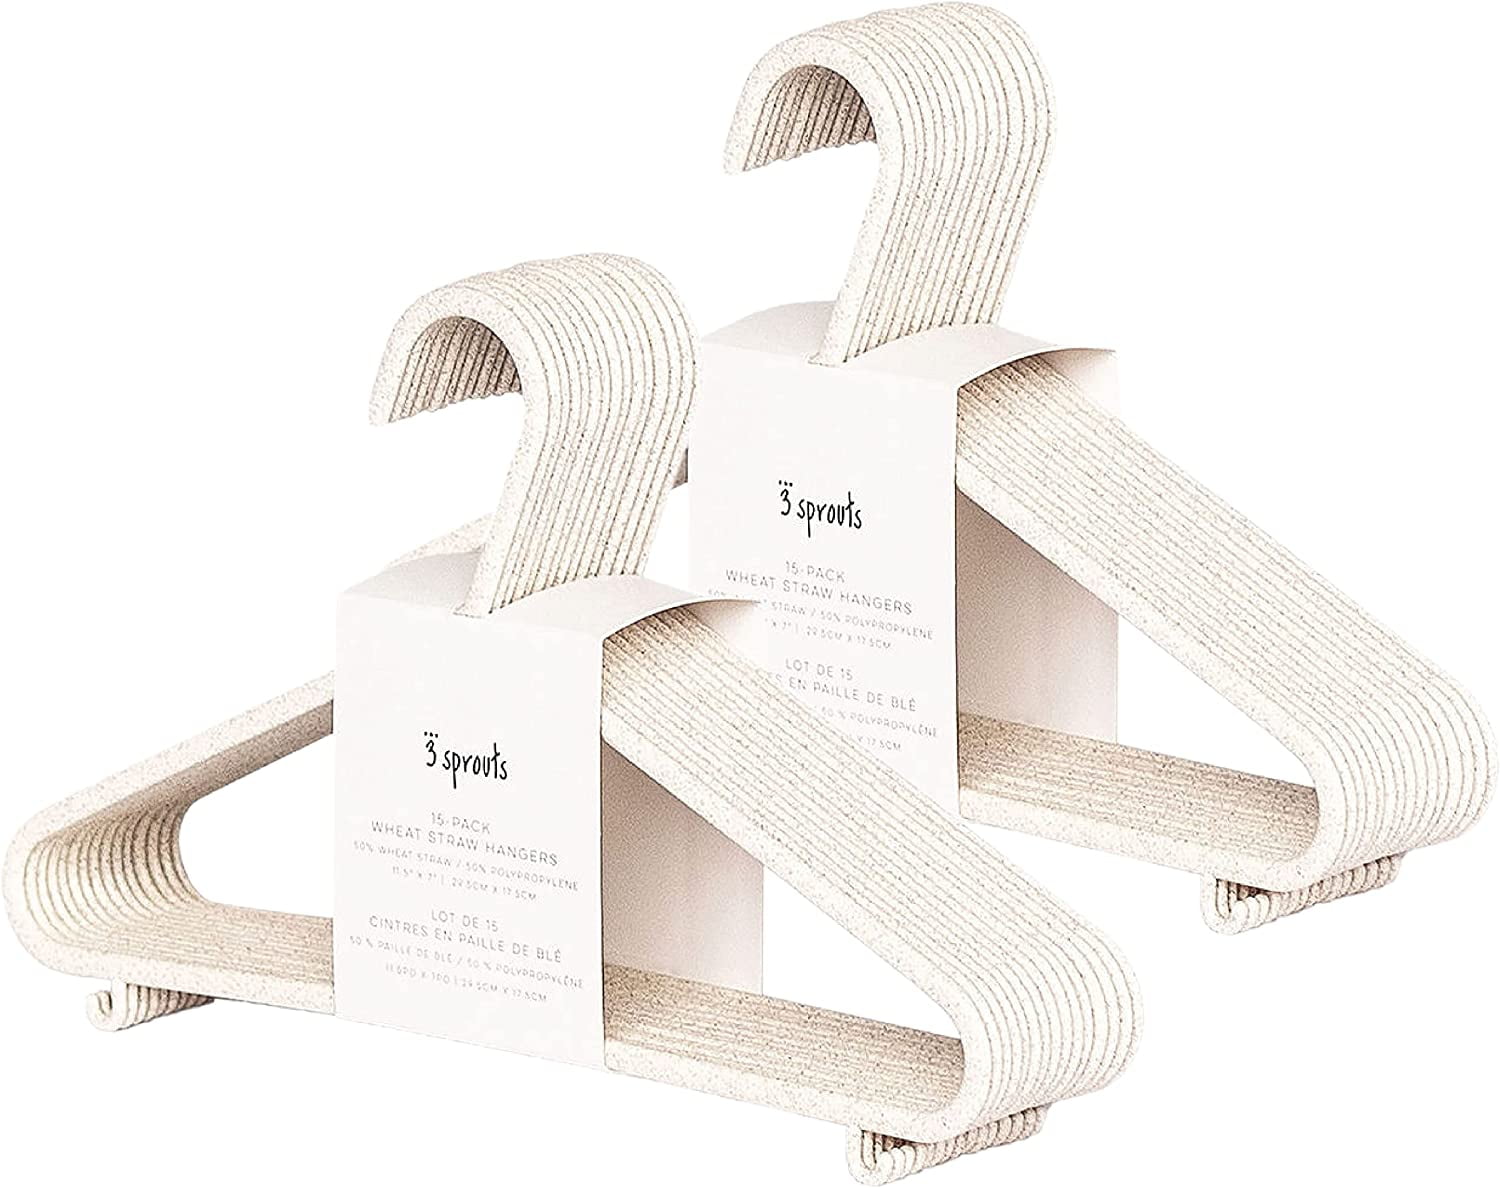 Eco-Friendly Clothing Hangers for Avg. Weight (Max 3lbs) Clothes Made from  100% Recycled Post Industrial Plastic (Beige, 20)